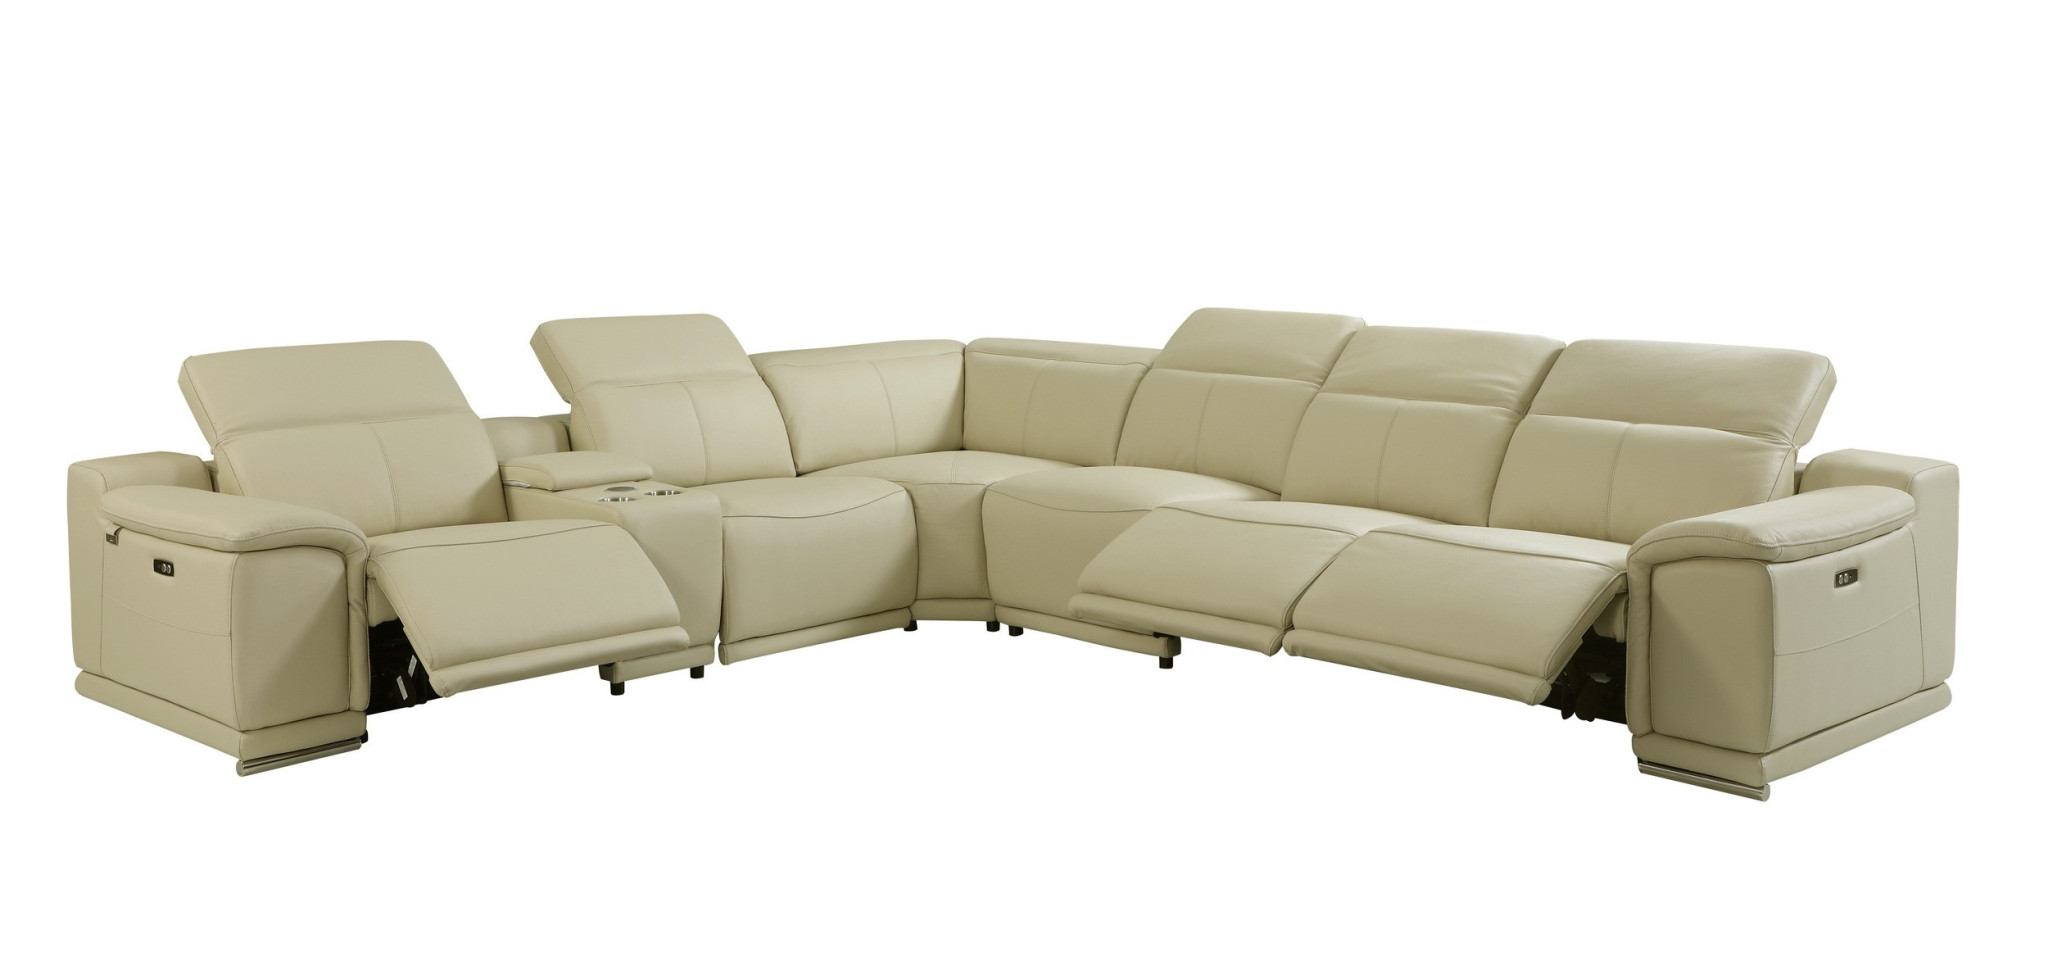 Beige Italian Leather Power Reclining U Shaped Seven Piece Corner Sectional With Console-476590-1